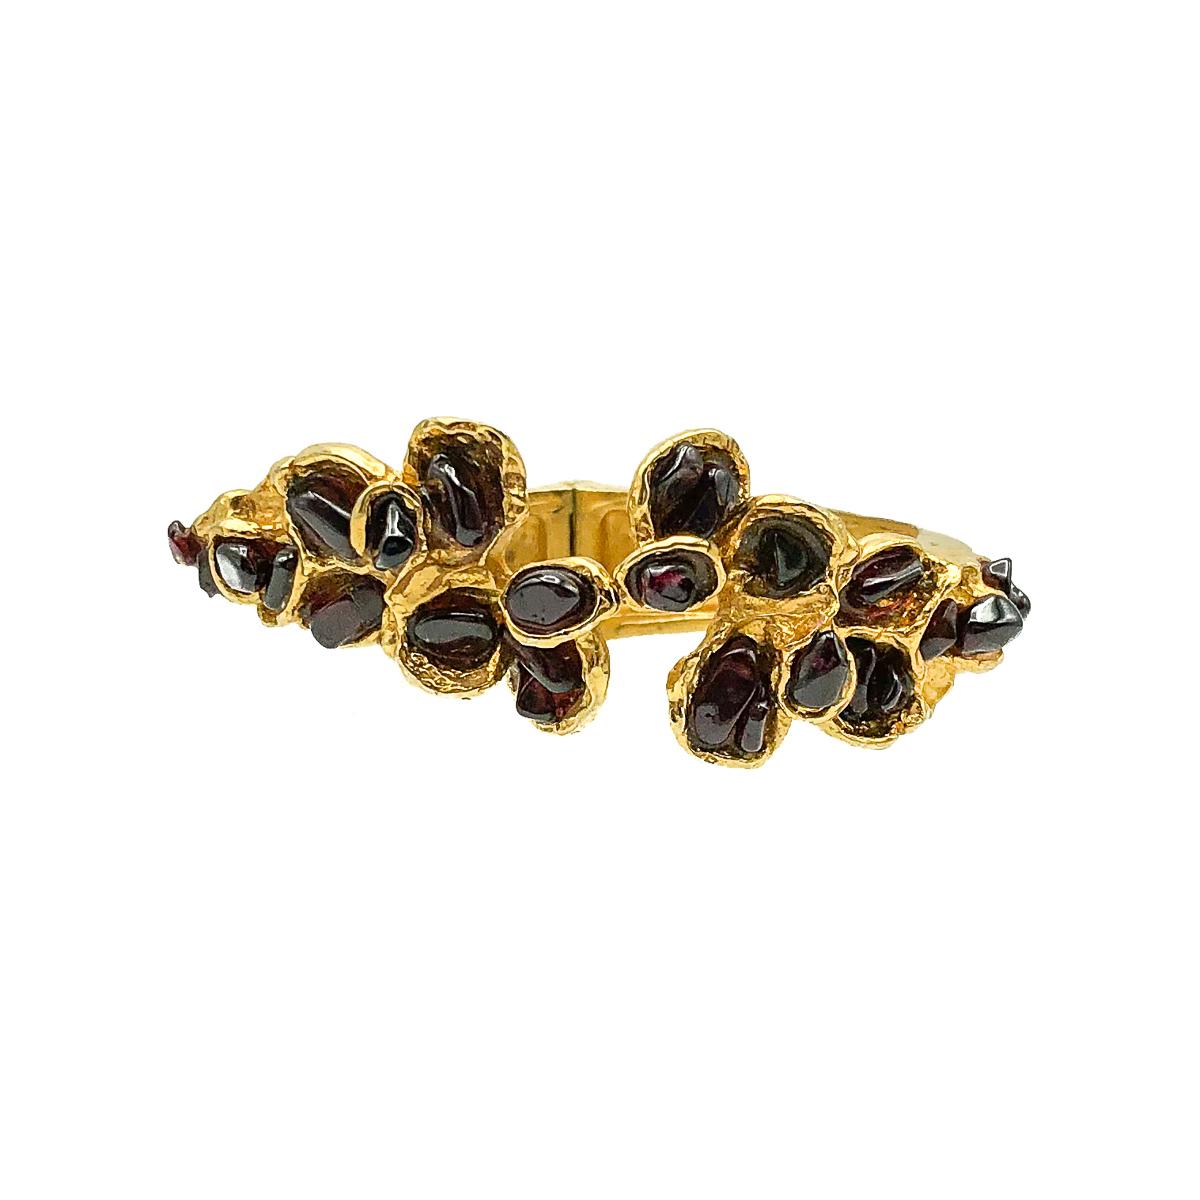 A Vintage Goossens Garnet Clamper. Crafted with 24ct gold plated brass metal and polished tumbled garnets. In very good vintage condition, unsigned and attributed to Maison Goossens based on the workmanship and materials, approx. 5cm inner diameter